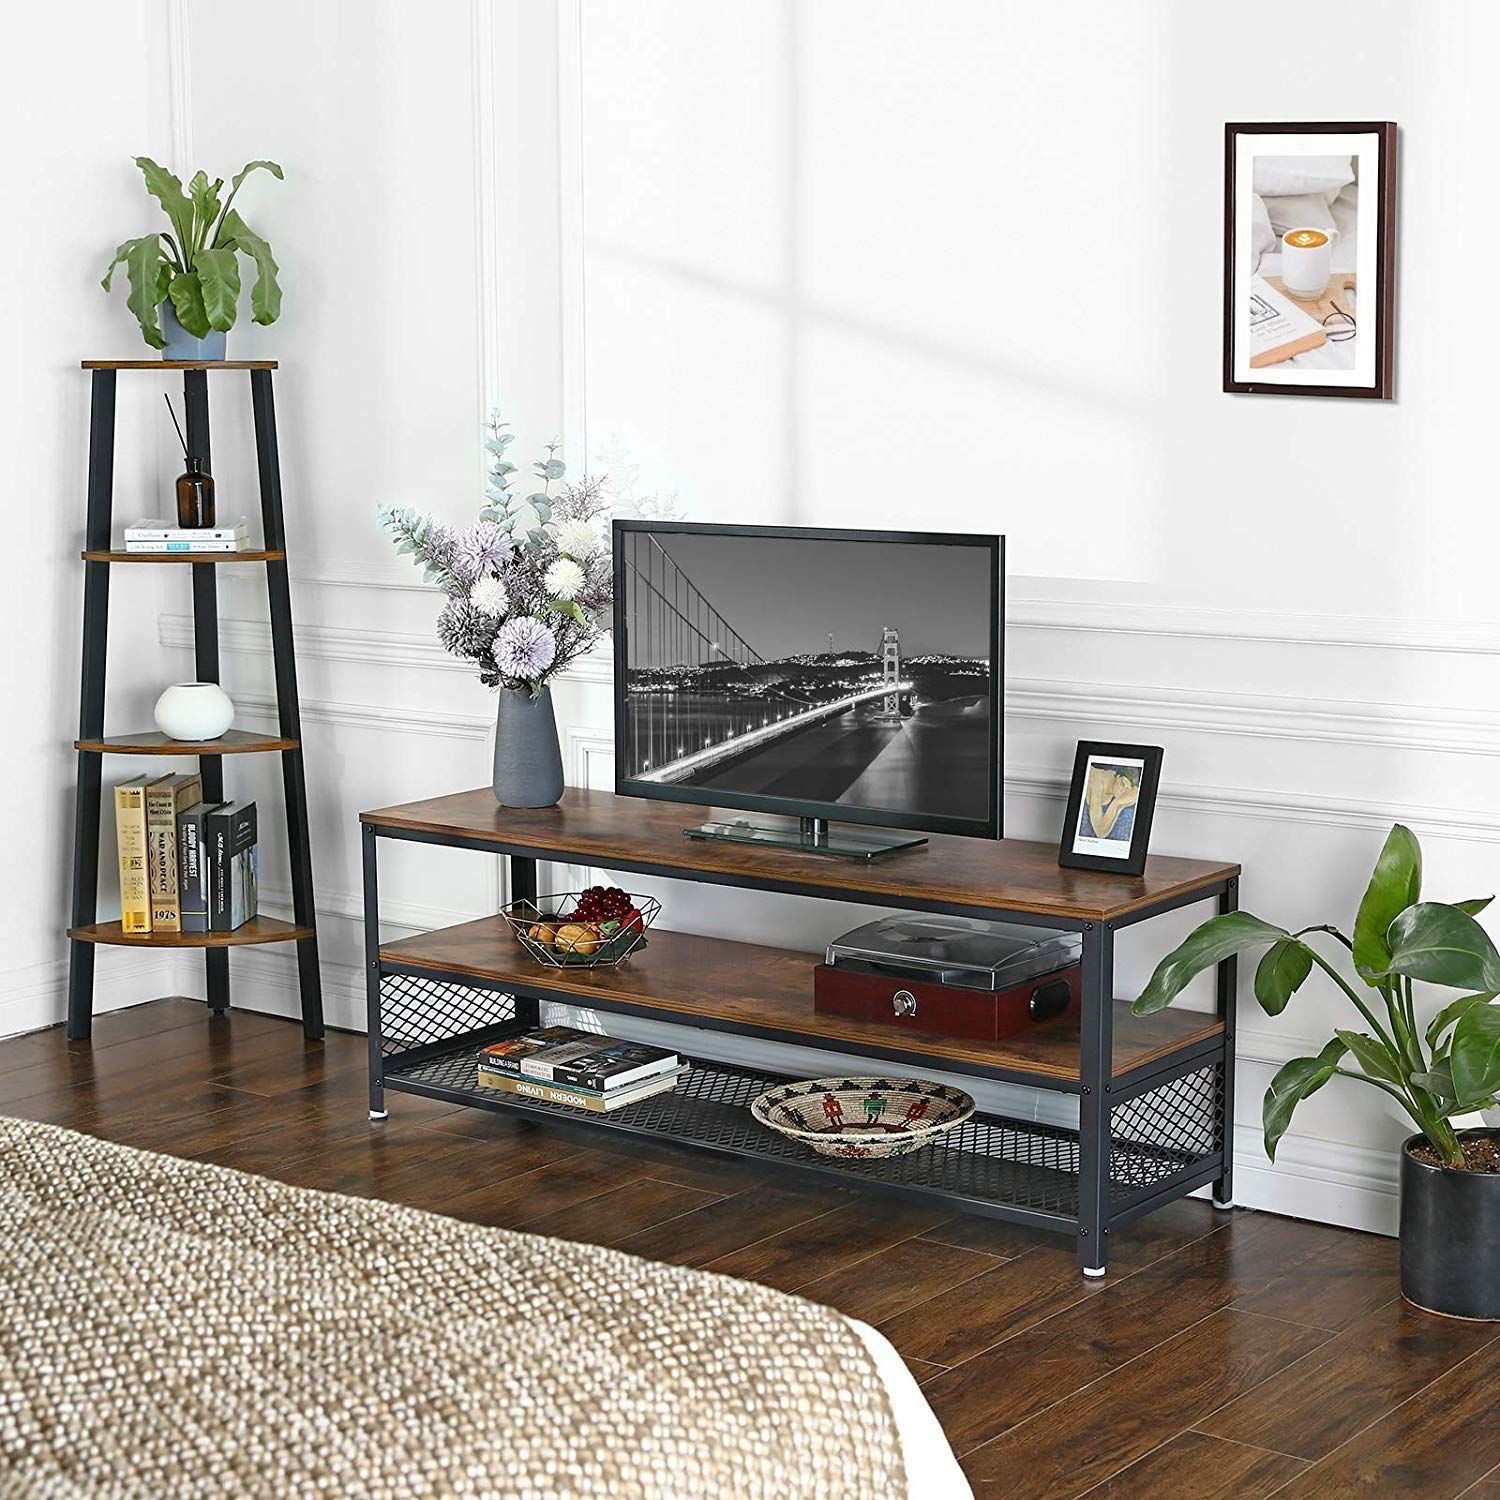 Looking For A Stylishly Designed 65 Inch Tv Stand? | Tvmates Intended For 65 Inch Tv Stands With Integrated Mount (View 11 of 15)